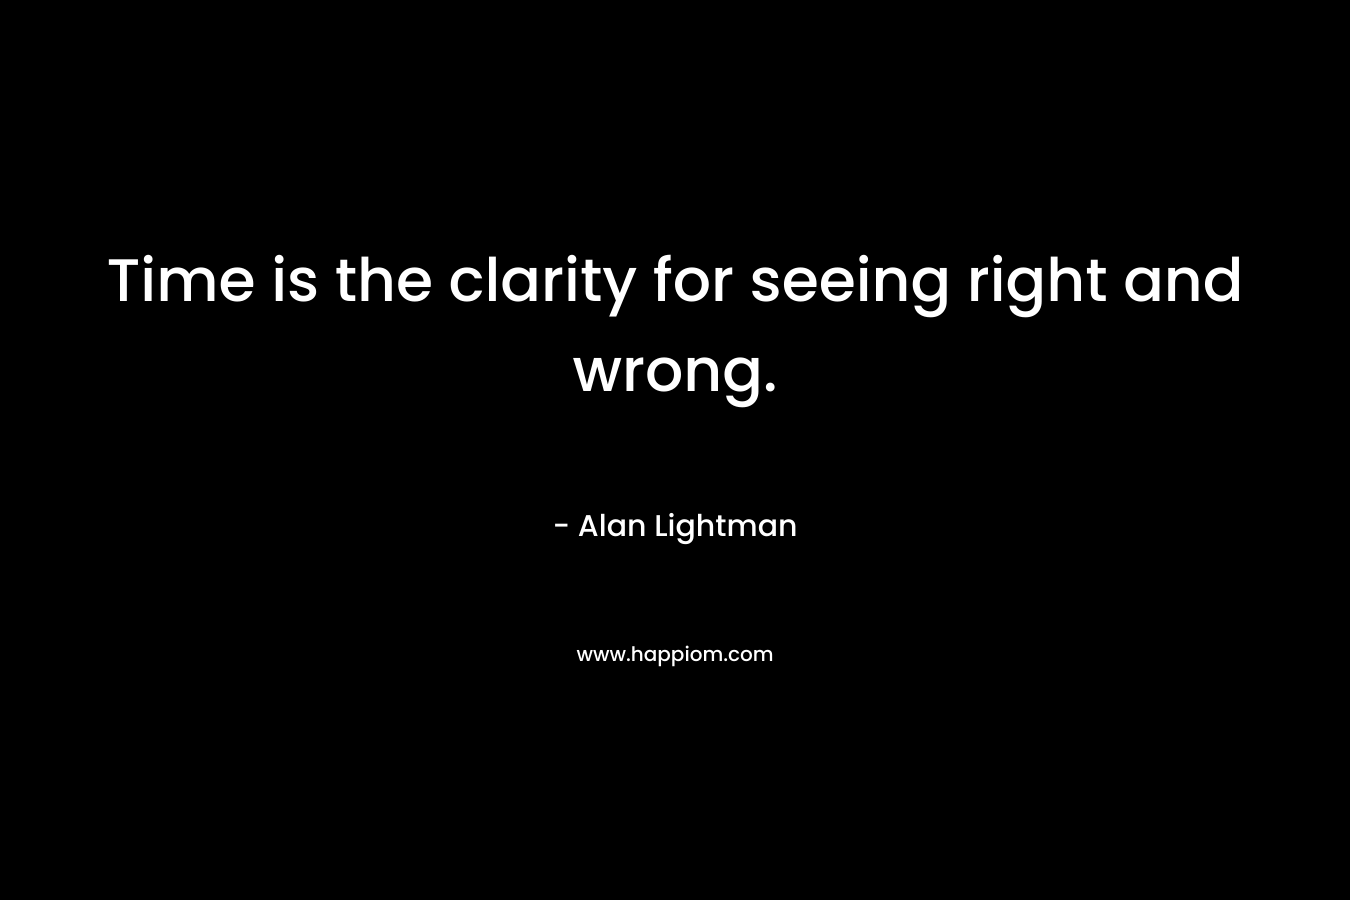 Time is the clarity for seeing right and wrong.